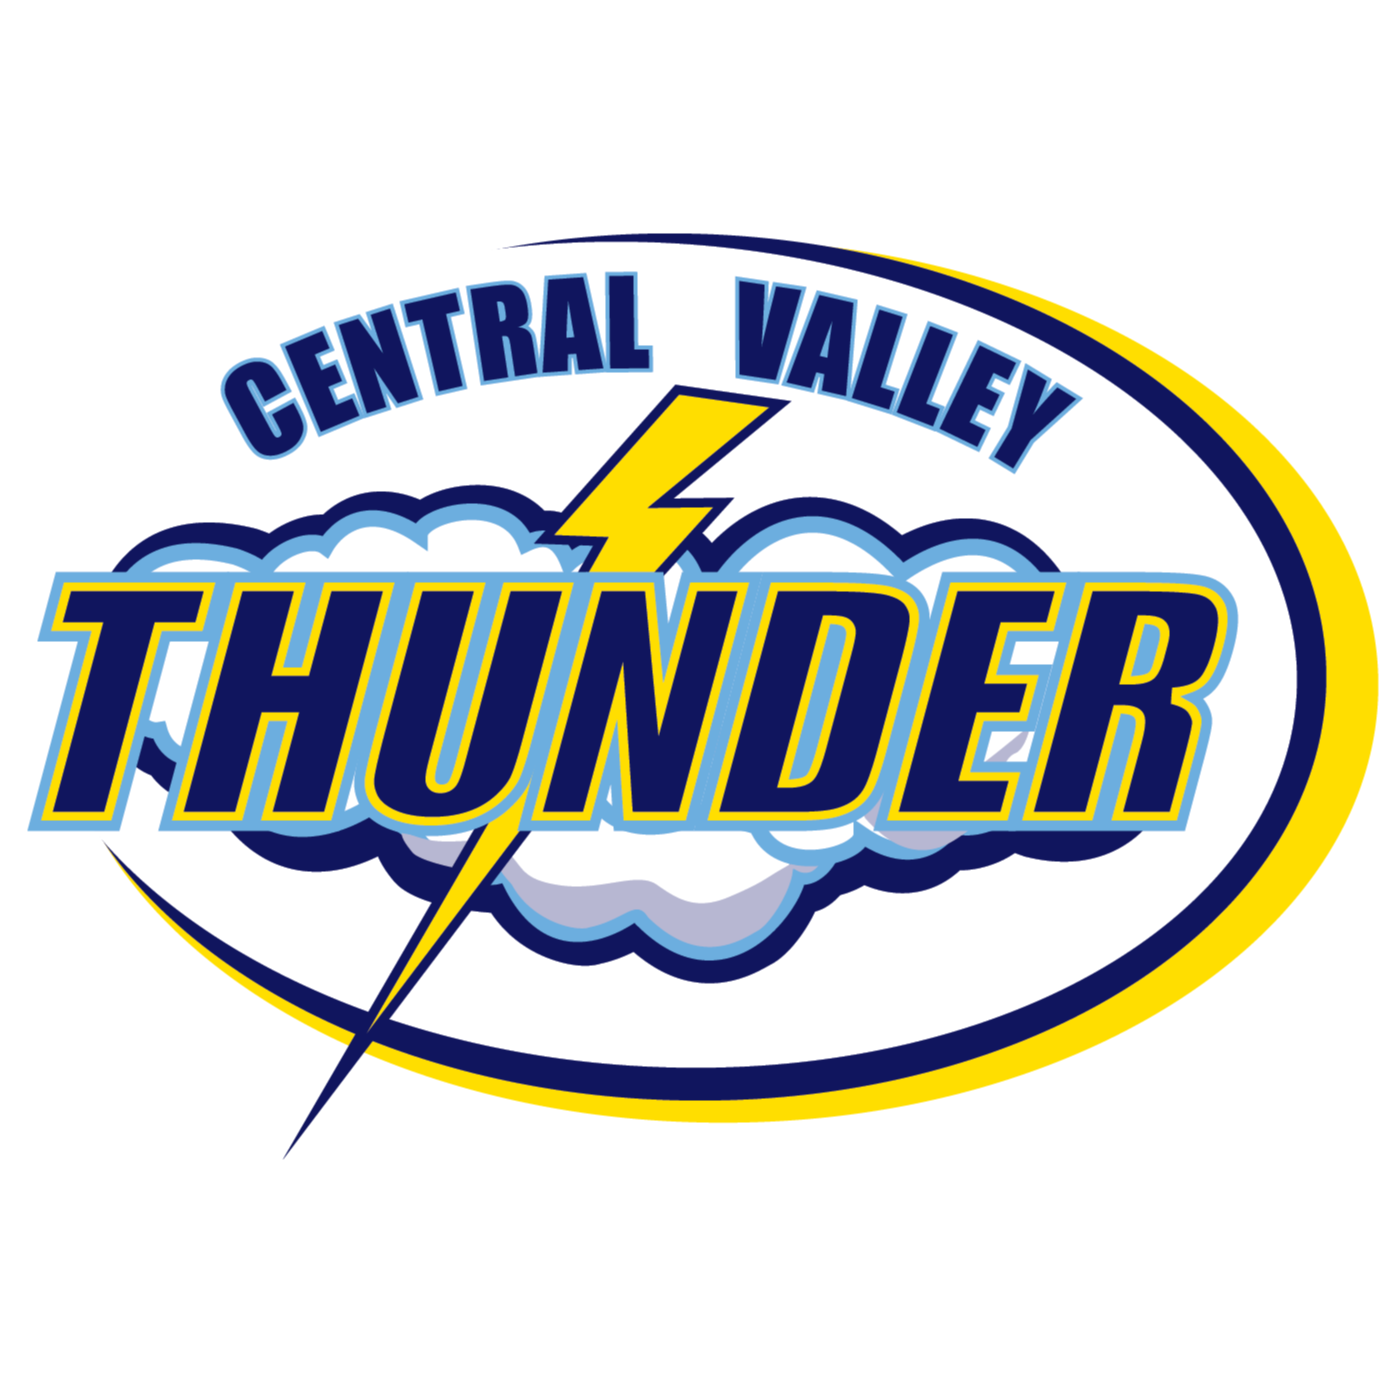 Central Valley Central School District